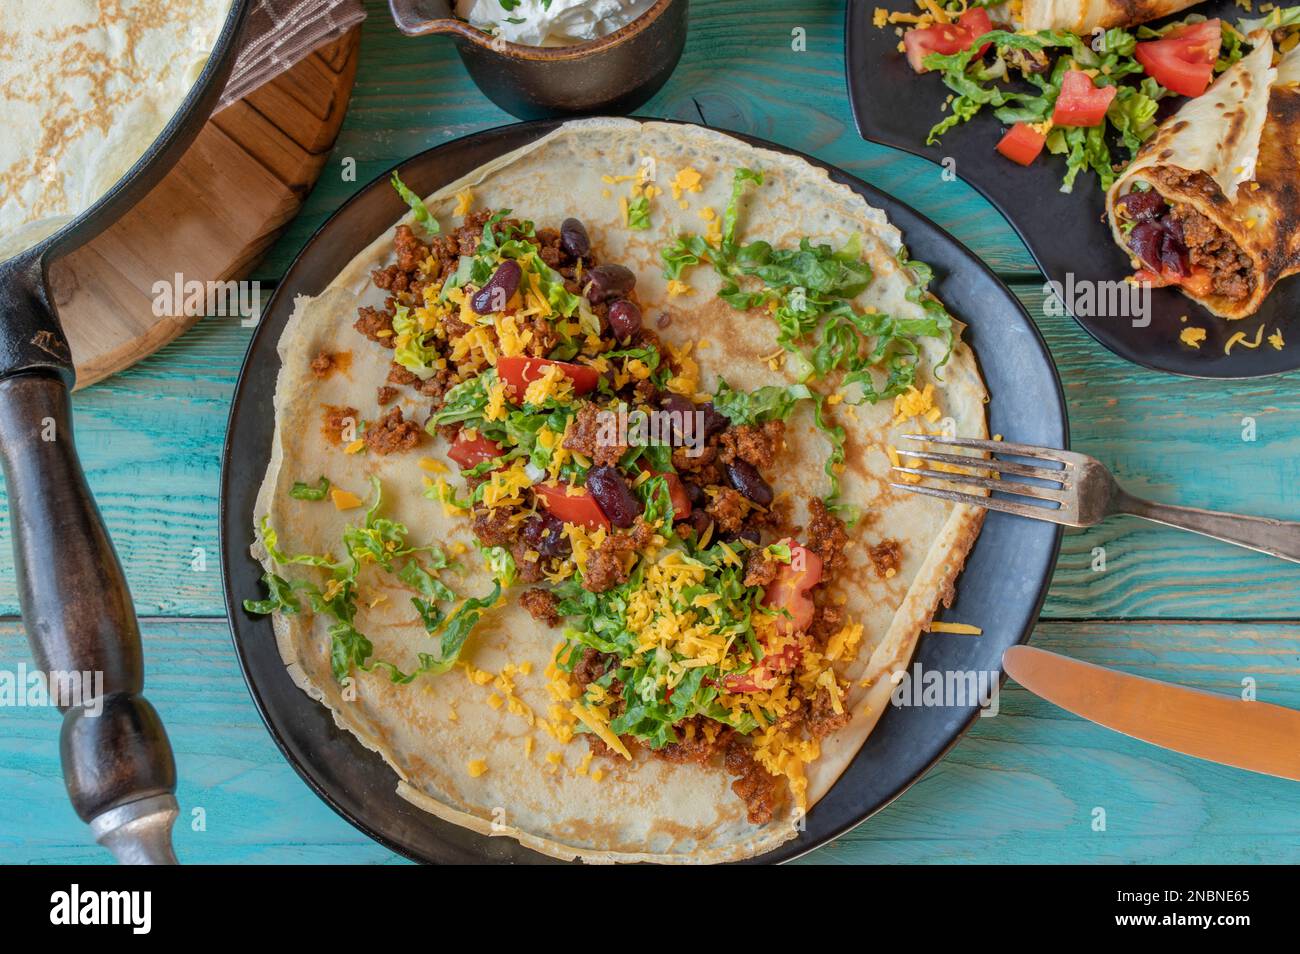 Burrito, crepe or pancake with ground beef, kidney beans, cheese and vegetables served open on a plate for dinner on wooden table Stock Photo